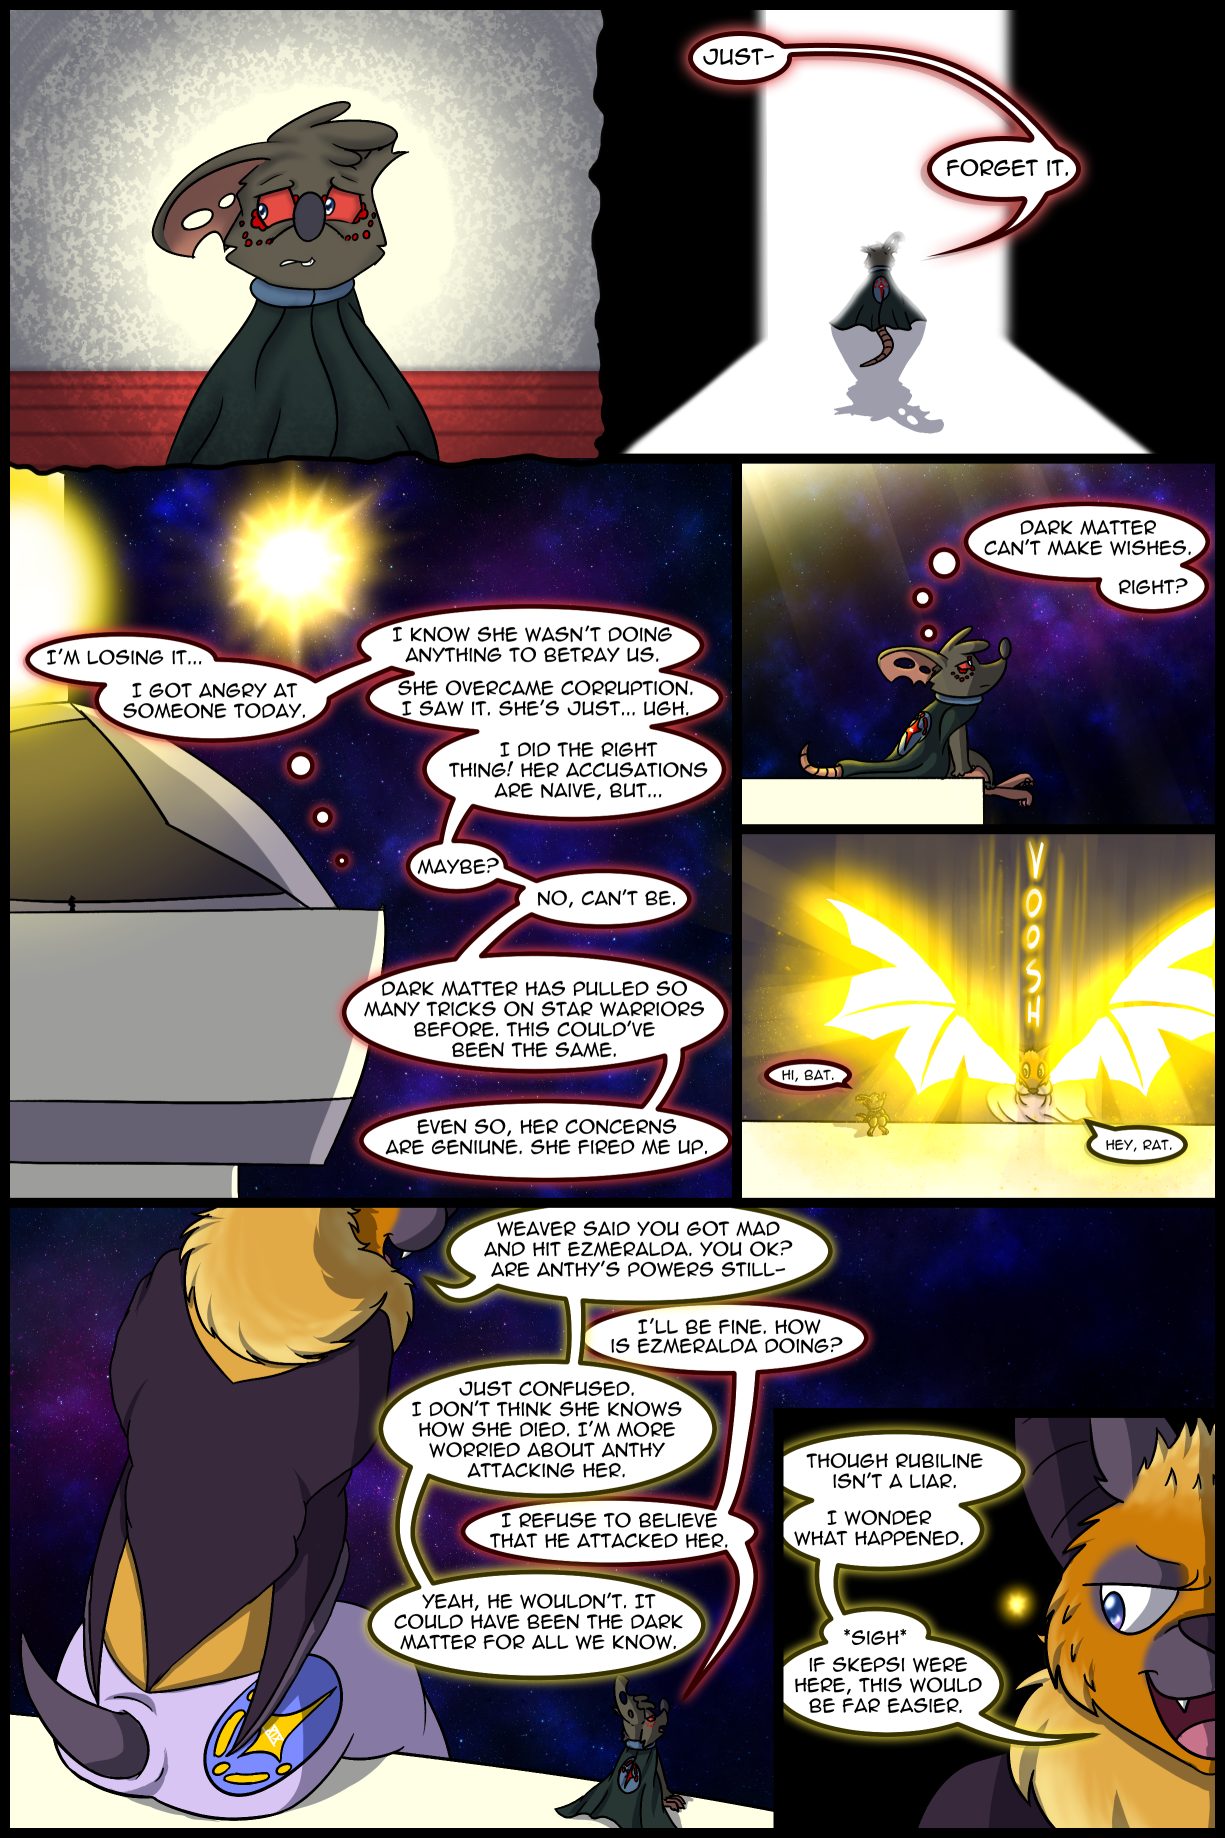 Ch4 Page 18 – Losing it